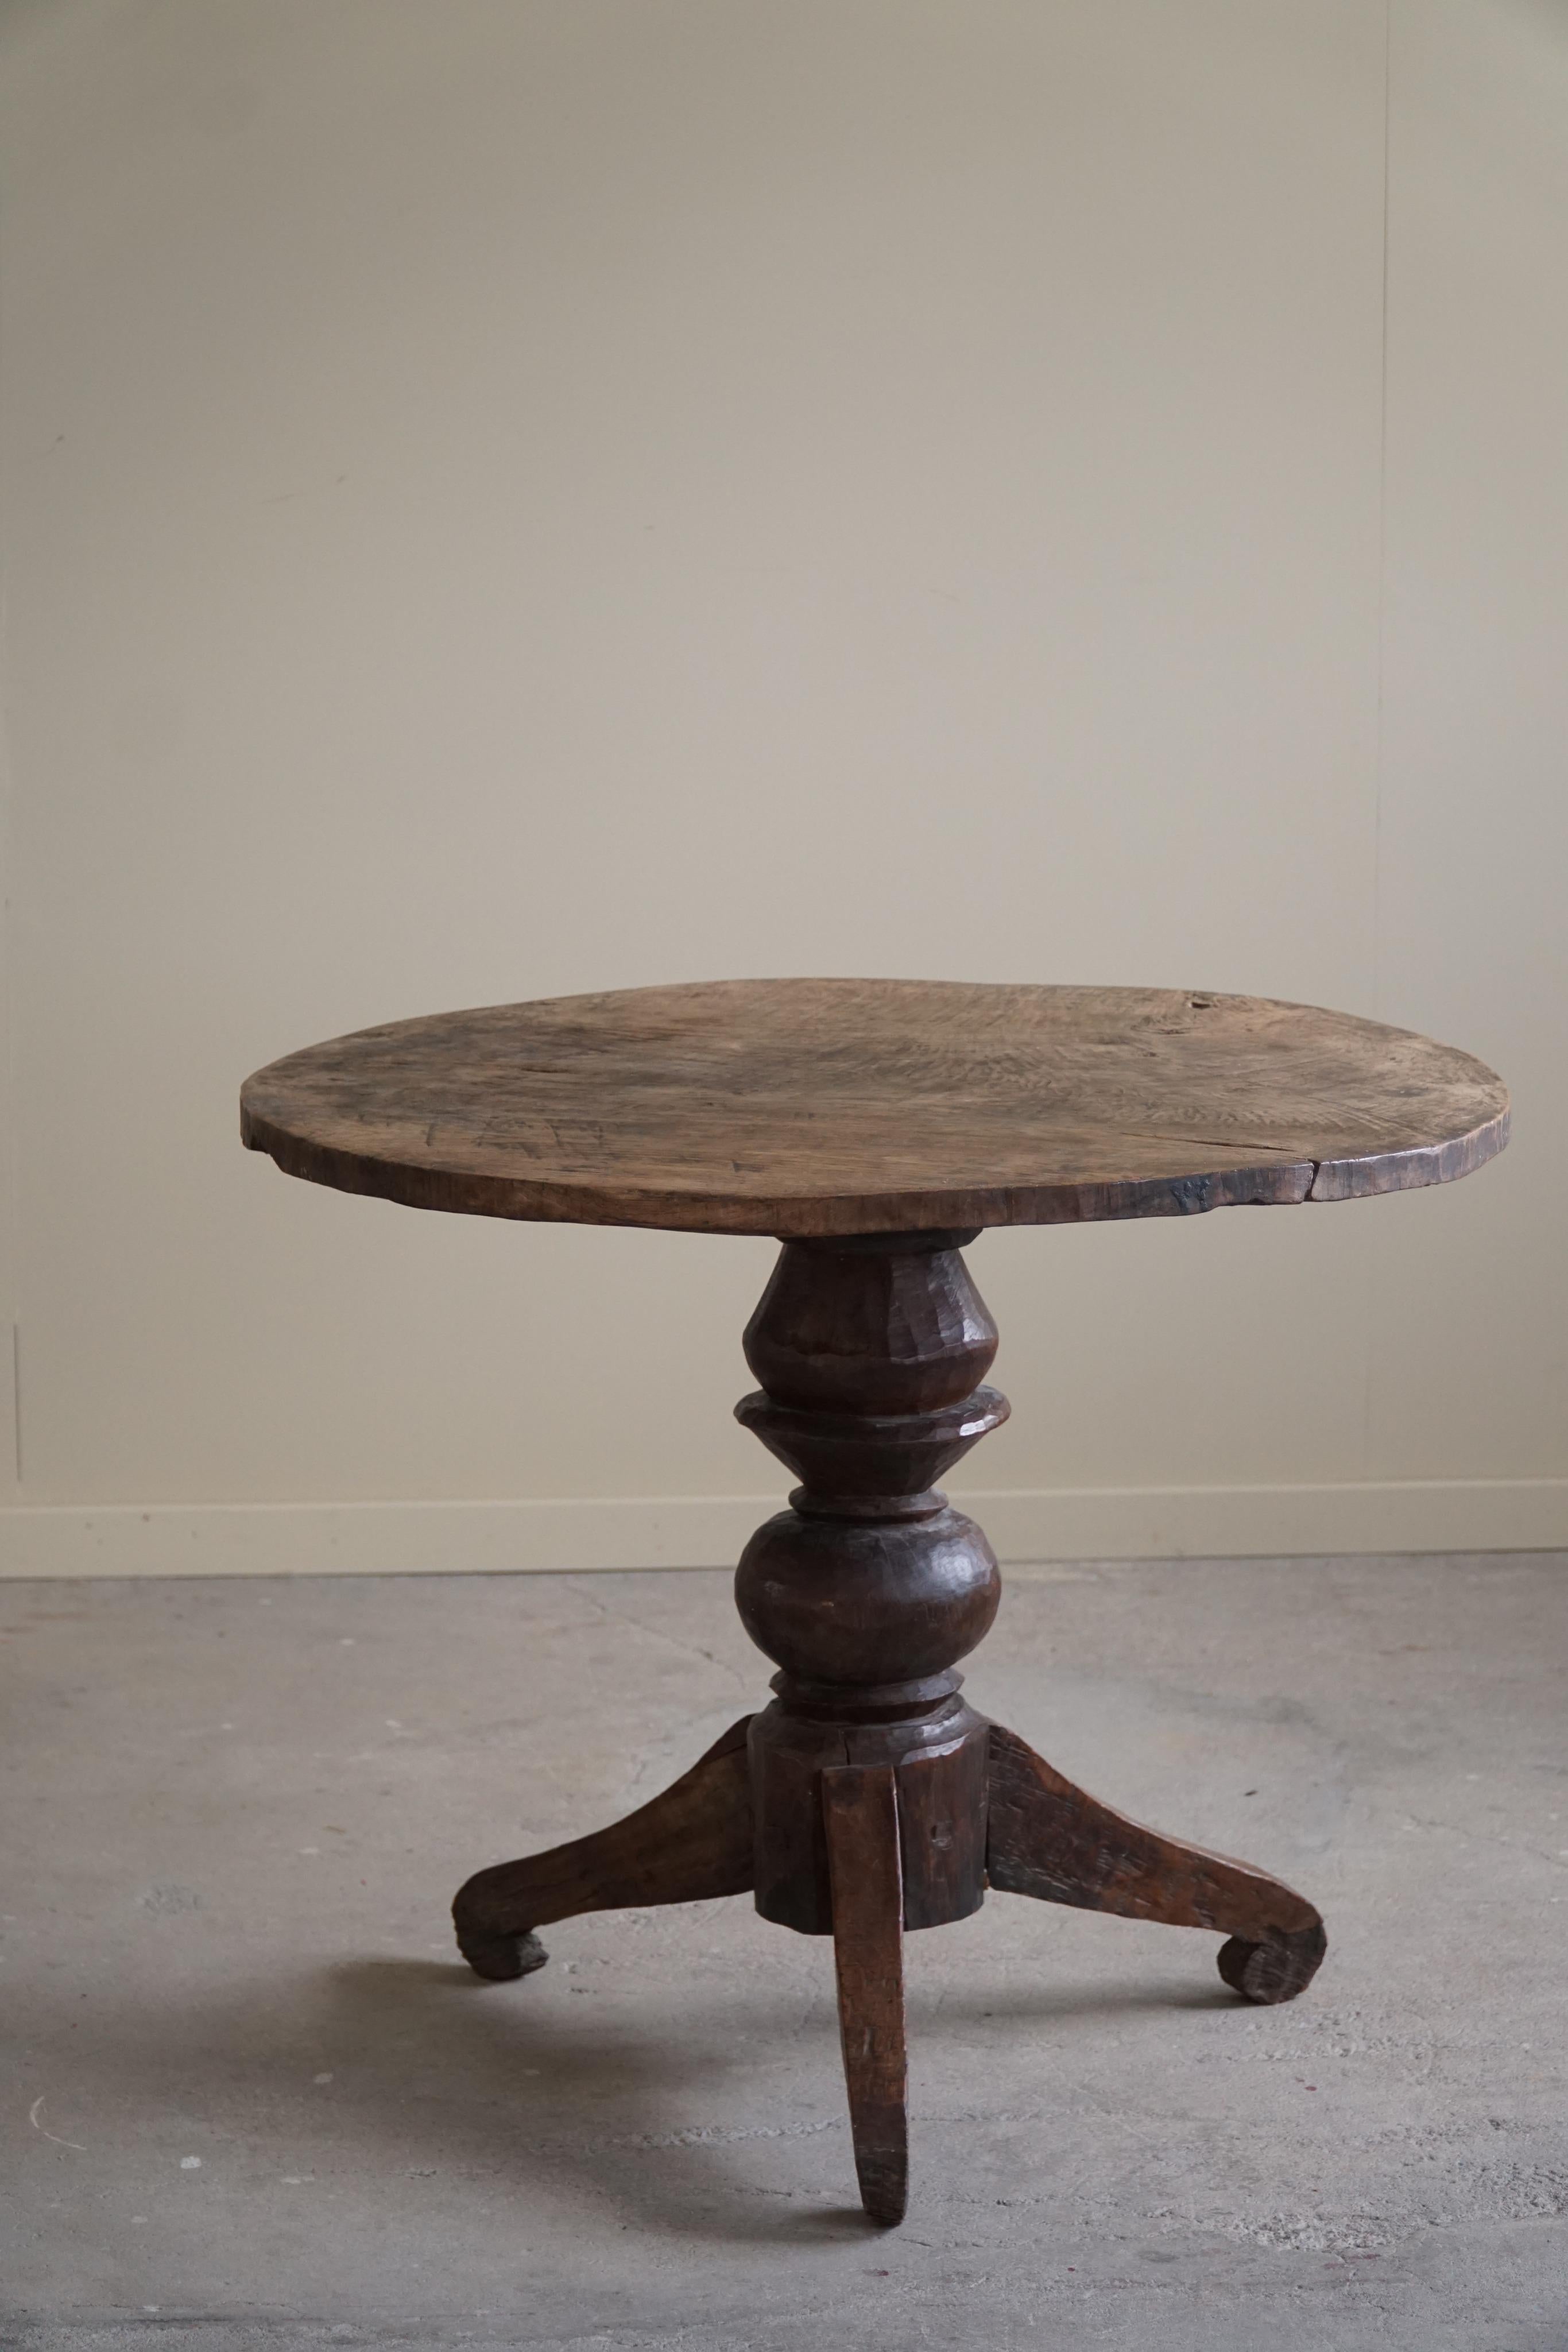 Antique Oak Dining Table / Side Table with Tripod Legs, Wabi Sabi, Late 18th C 10